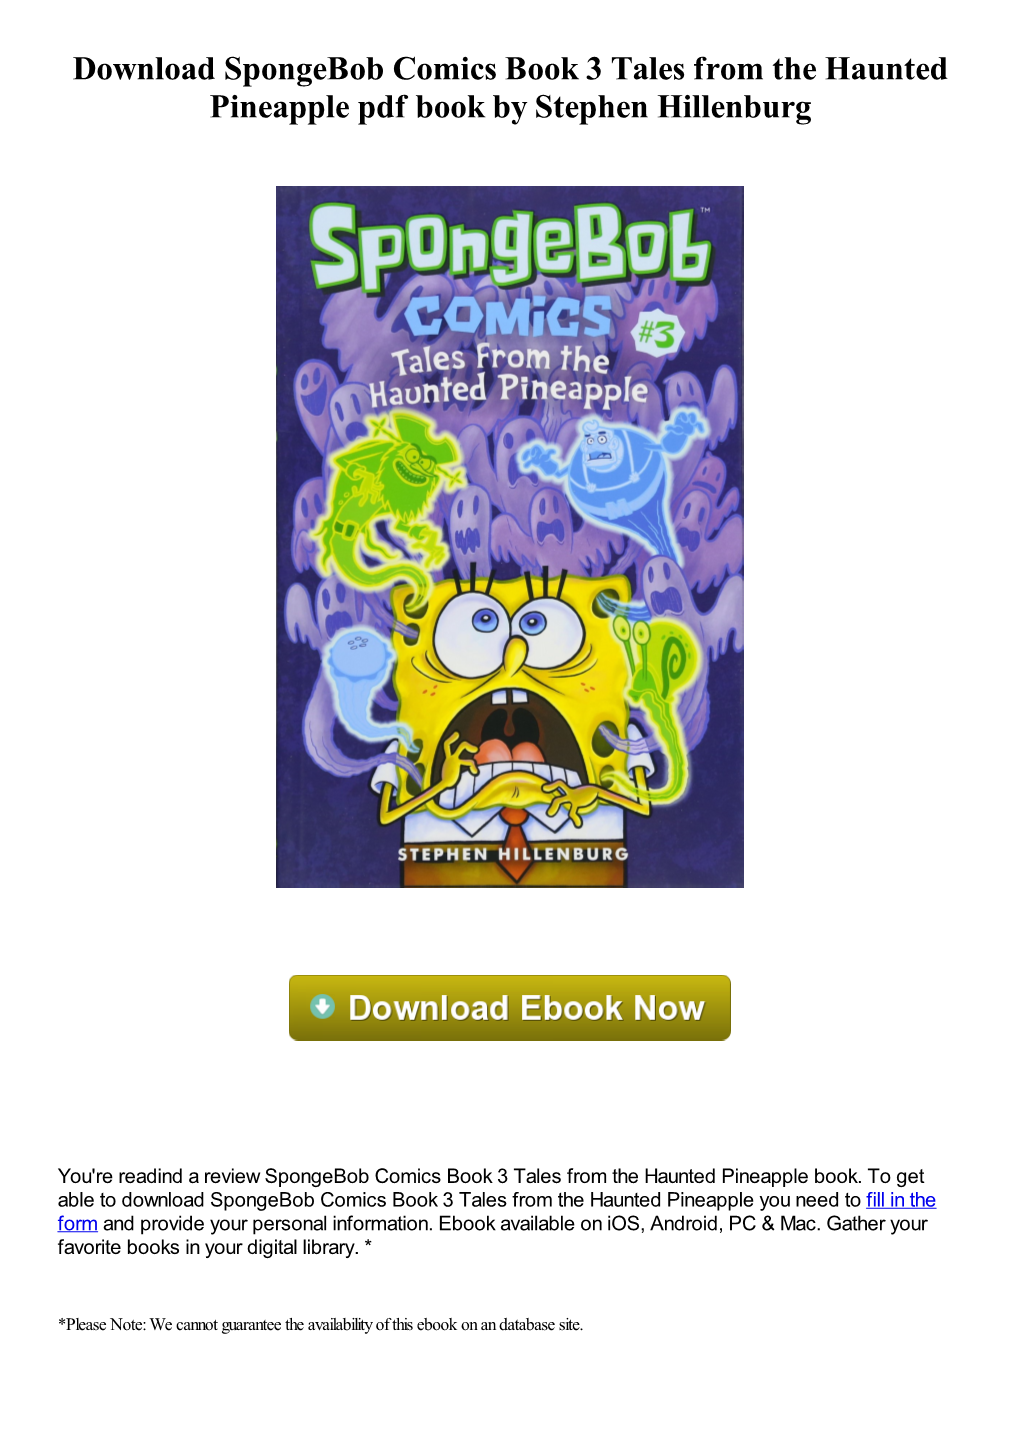 Download Spongebob Comics Book 3 Tales from the Haunted Pineapple Pdf Book by Stephen Hillenburg